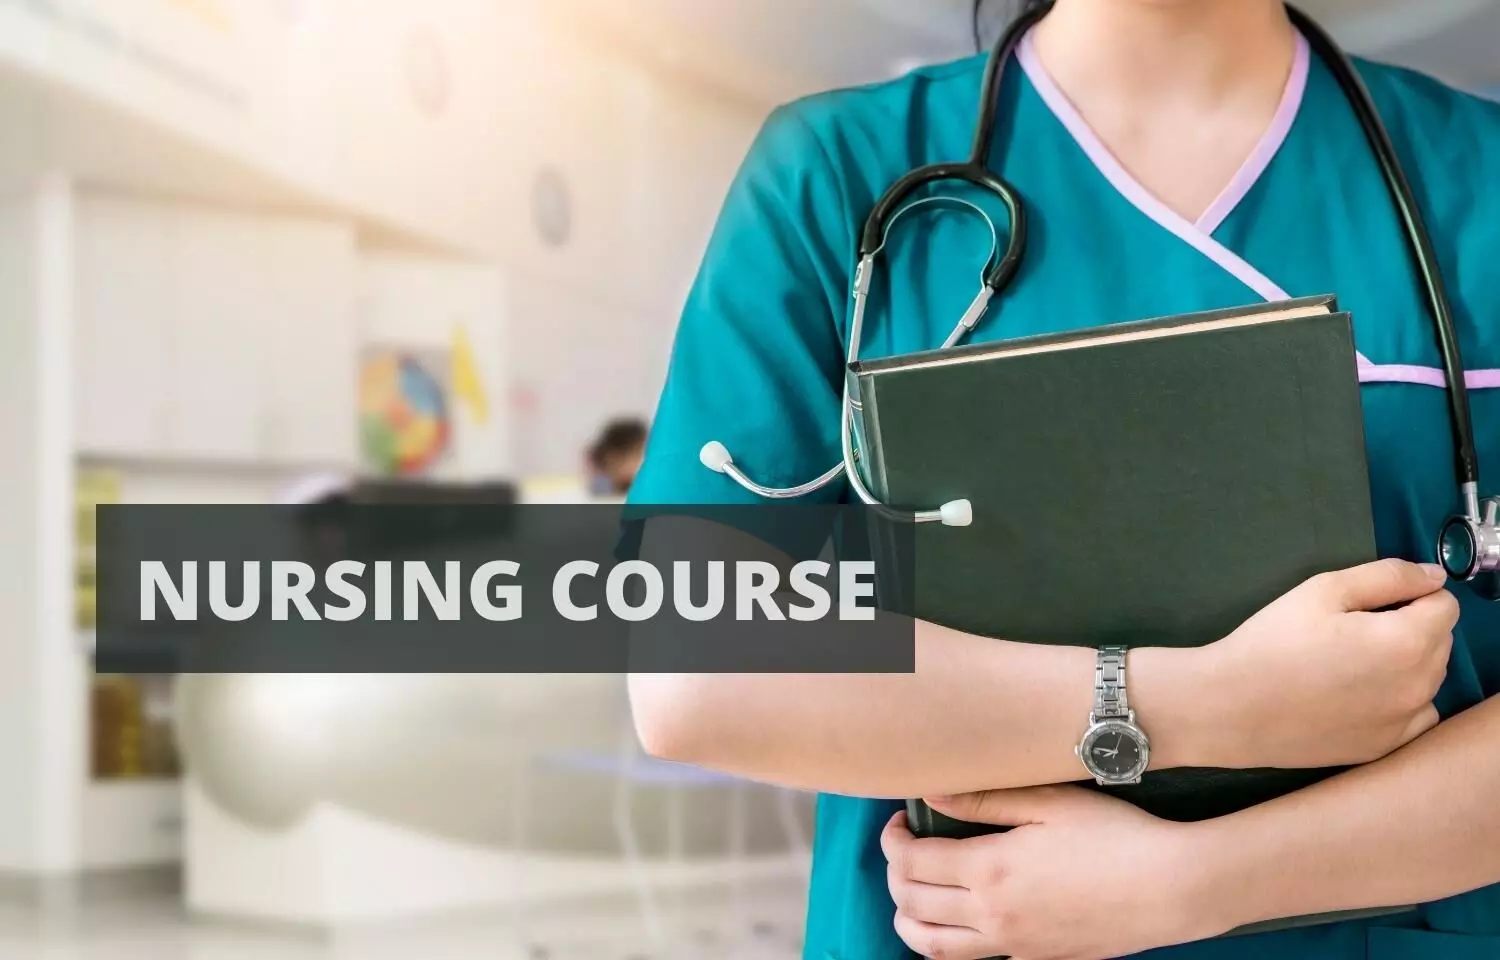 BSc Nursing 2021: DME Assam releases Counselling Schedule For Admissions Into Vacant EWS Seats, Details